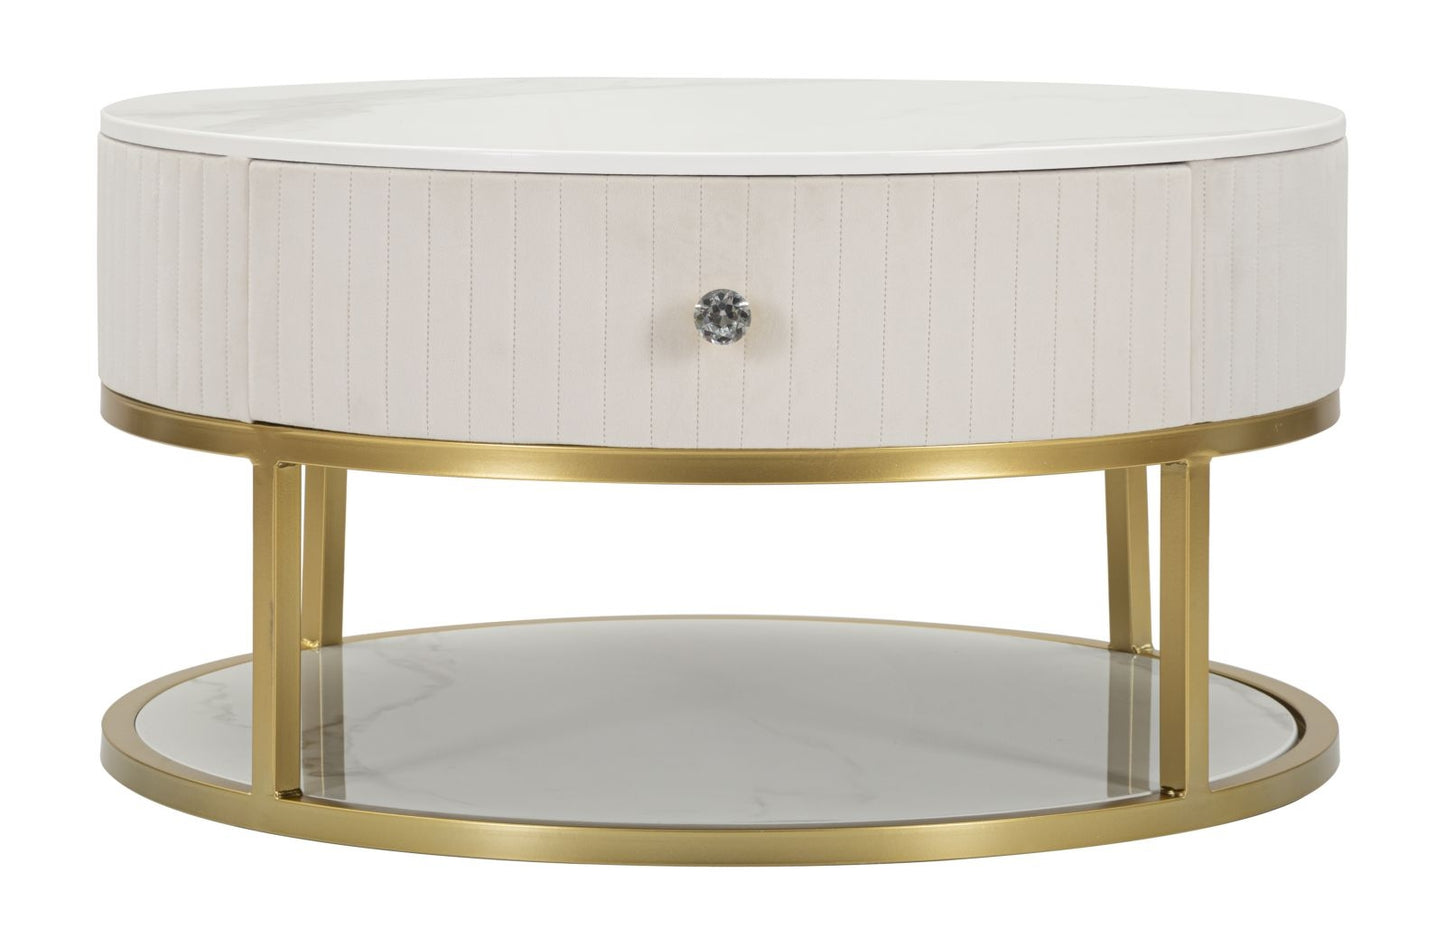 Buy Wood and metal coffee table upholstered with fabric, 2 drawers, Montpellier Cream / Gold, Ø75xH36 cm online, best price, free delivery